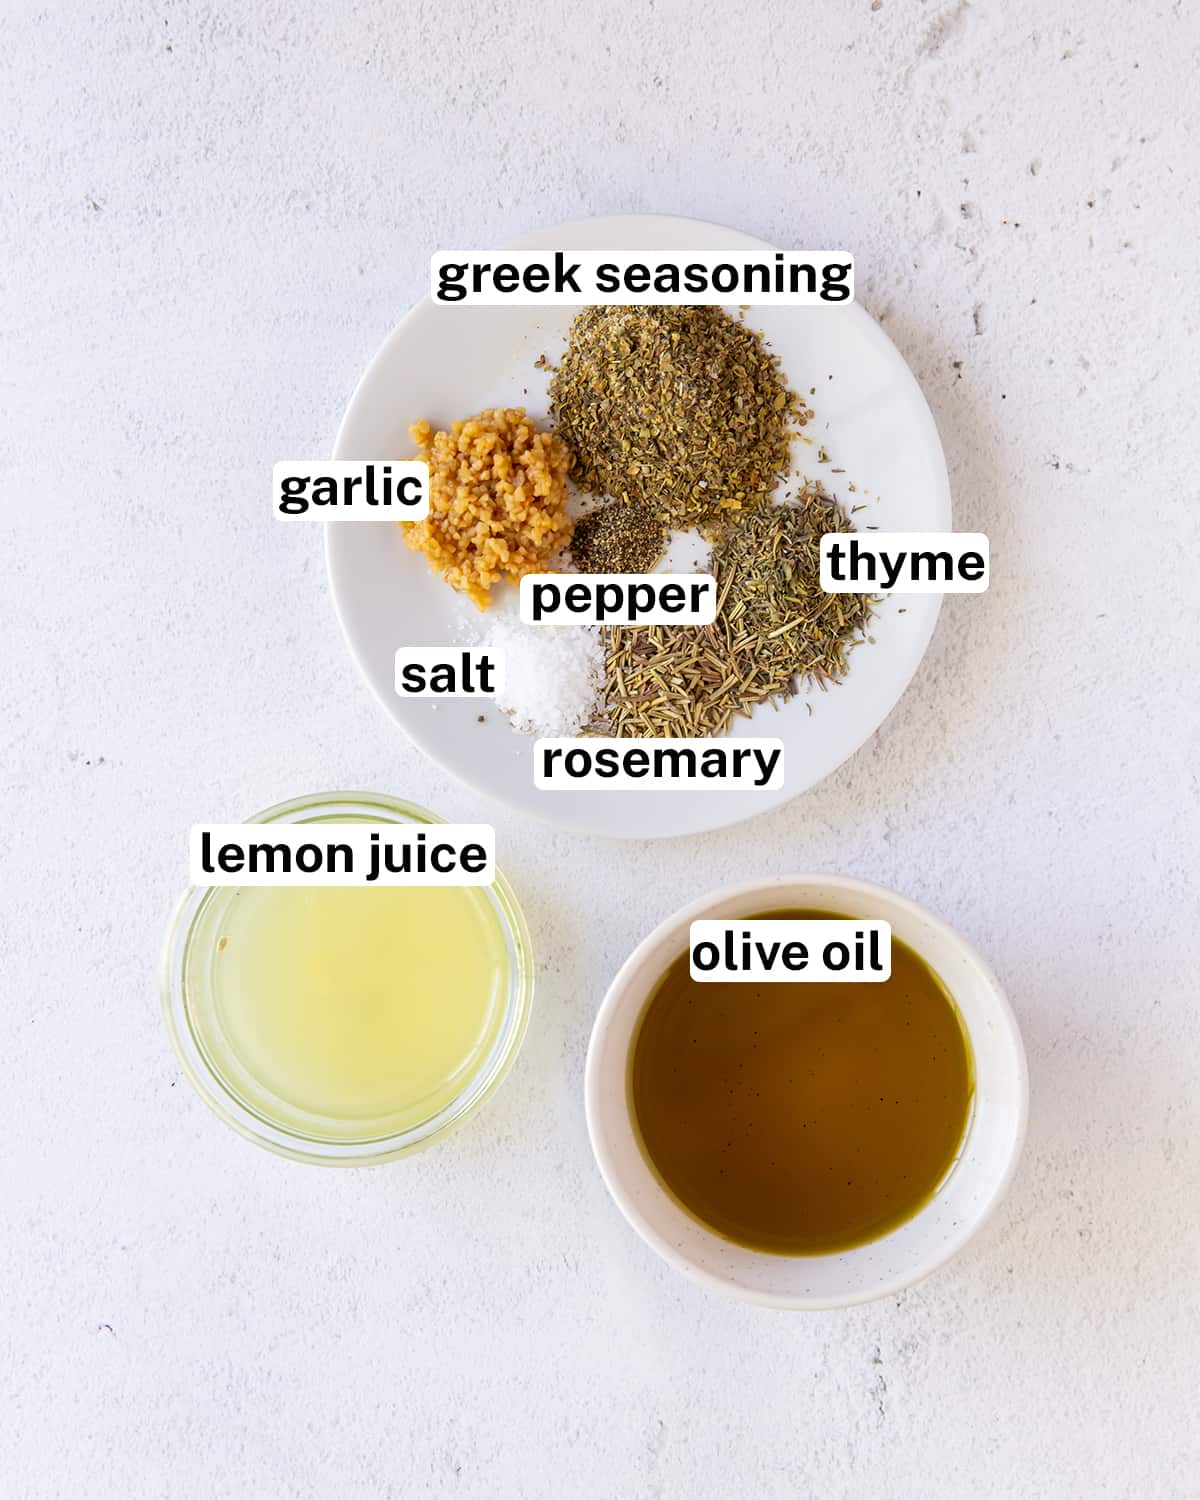 Ingredients including olive oil, lemon juice, and herbs with text overlay.